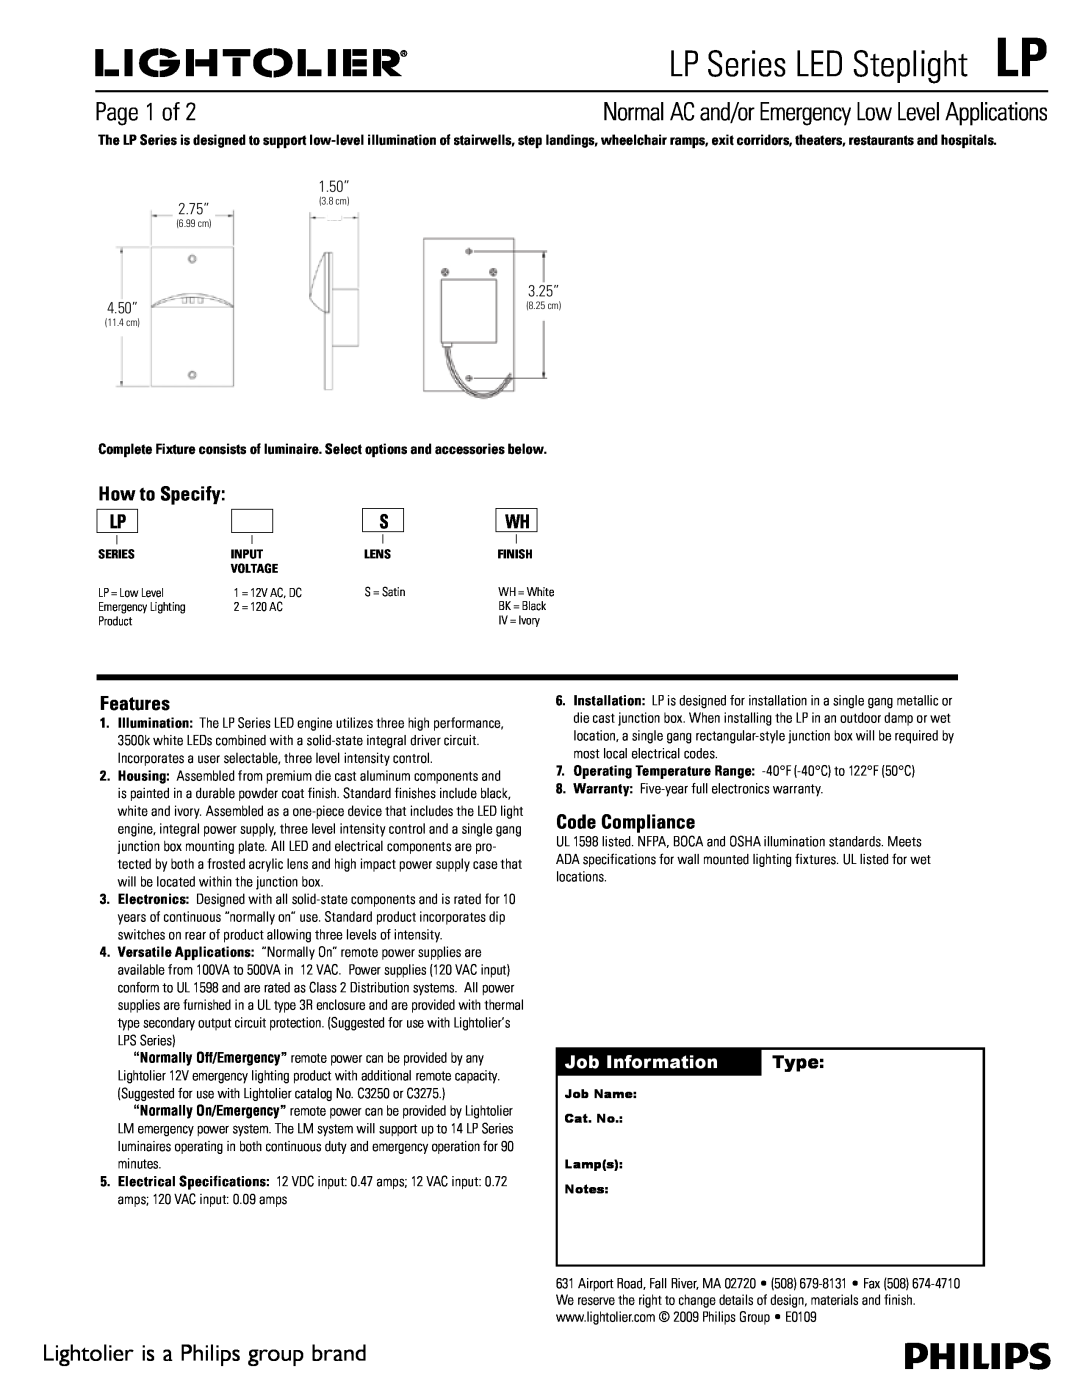 Lightolier LP Series specifications Page 1 of, Lightolier is a Philips group brand, How to Specify LP, Features, Type 